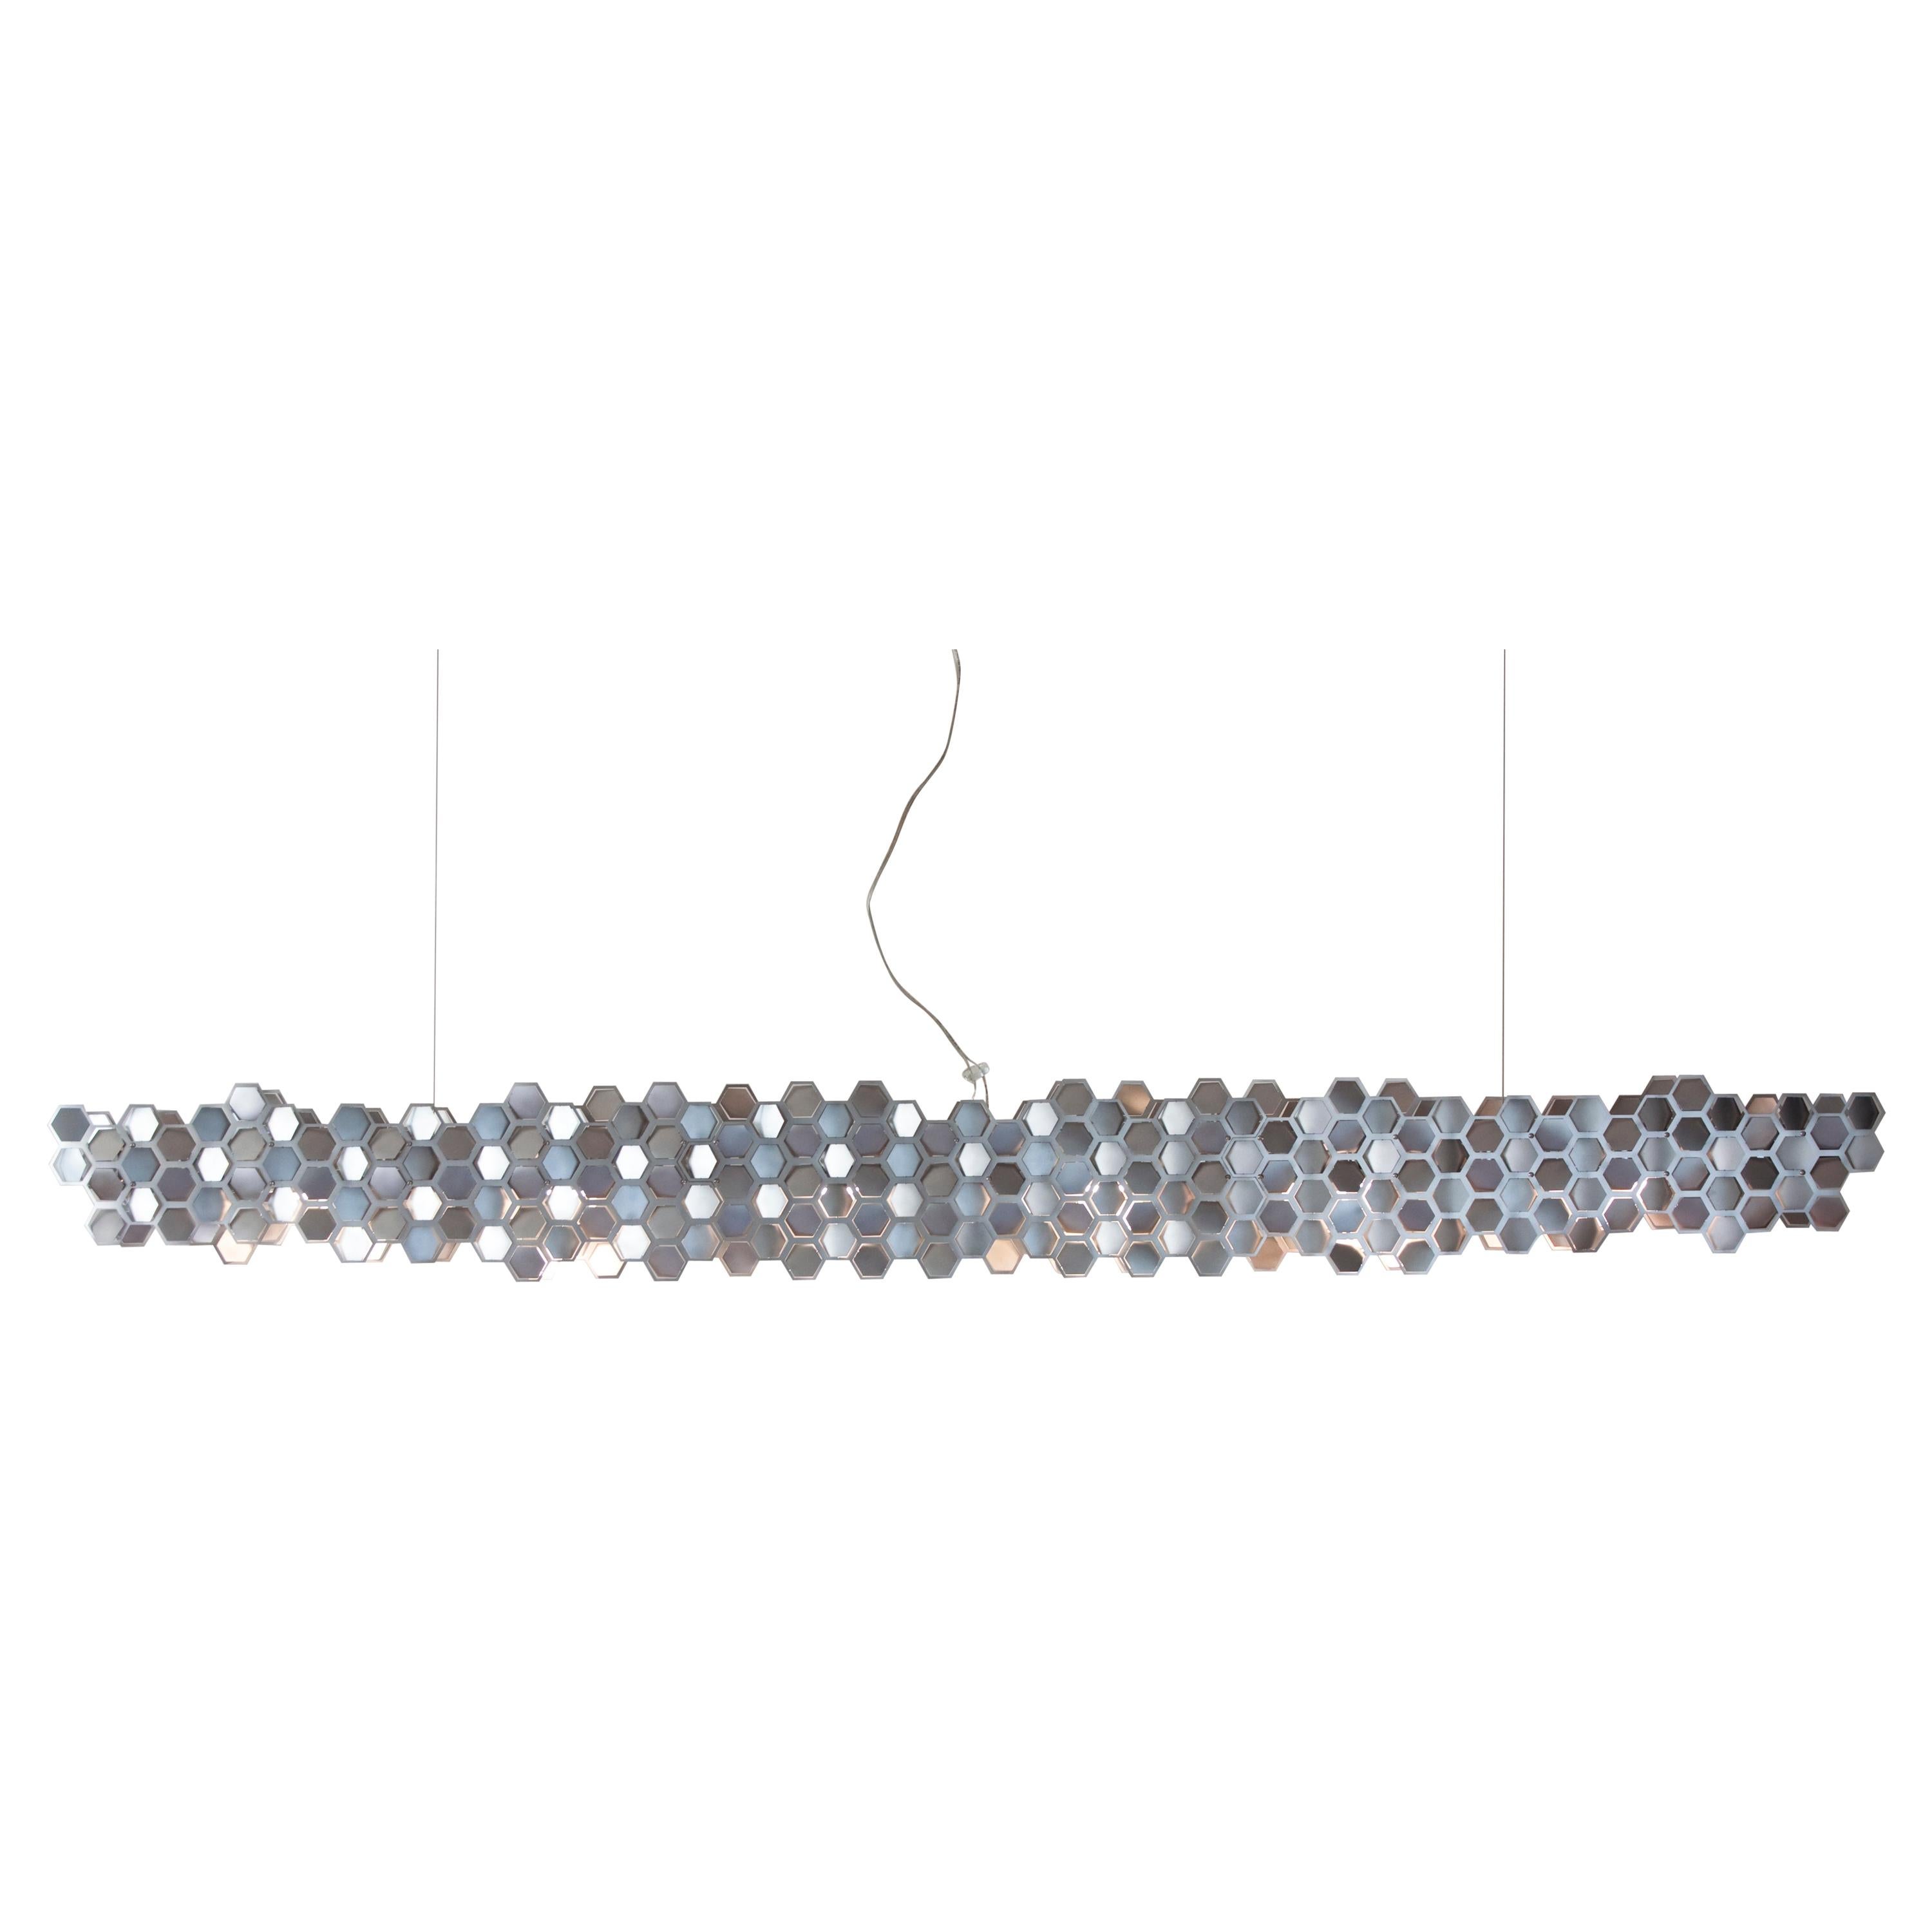 Beeline 70” Linear Chandelier in Stainless Steel by David D’Imperio For Sale